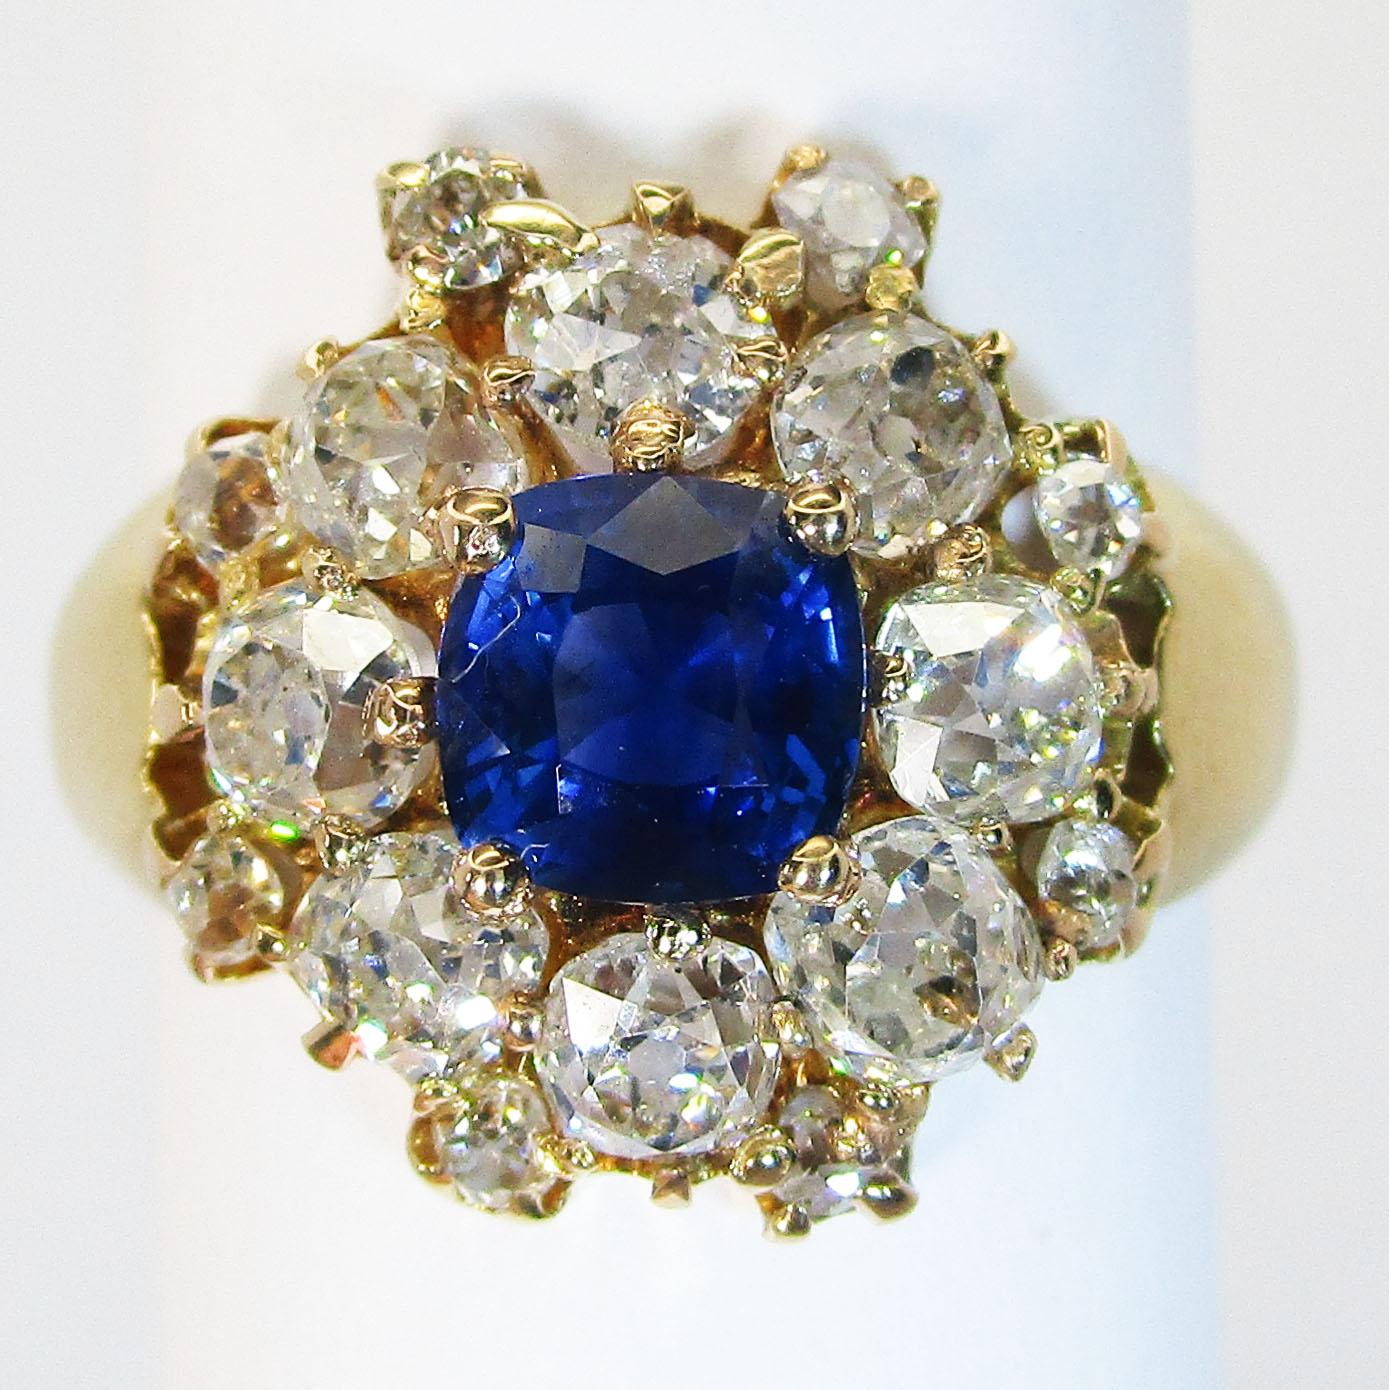 This ring boasts a brilliant, deep blue natural colored sapphire at its center that is nearly one carat! The center stone is cushion cut and such a rich blue that even in soft evening light, it boasts royal blue depth! The sapphire is surrounded by